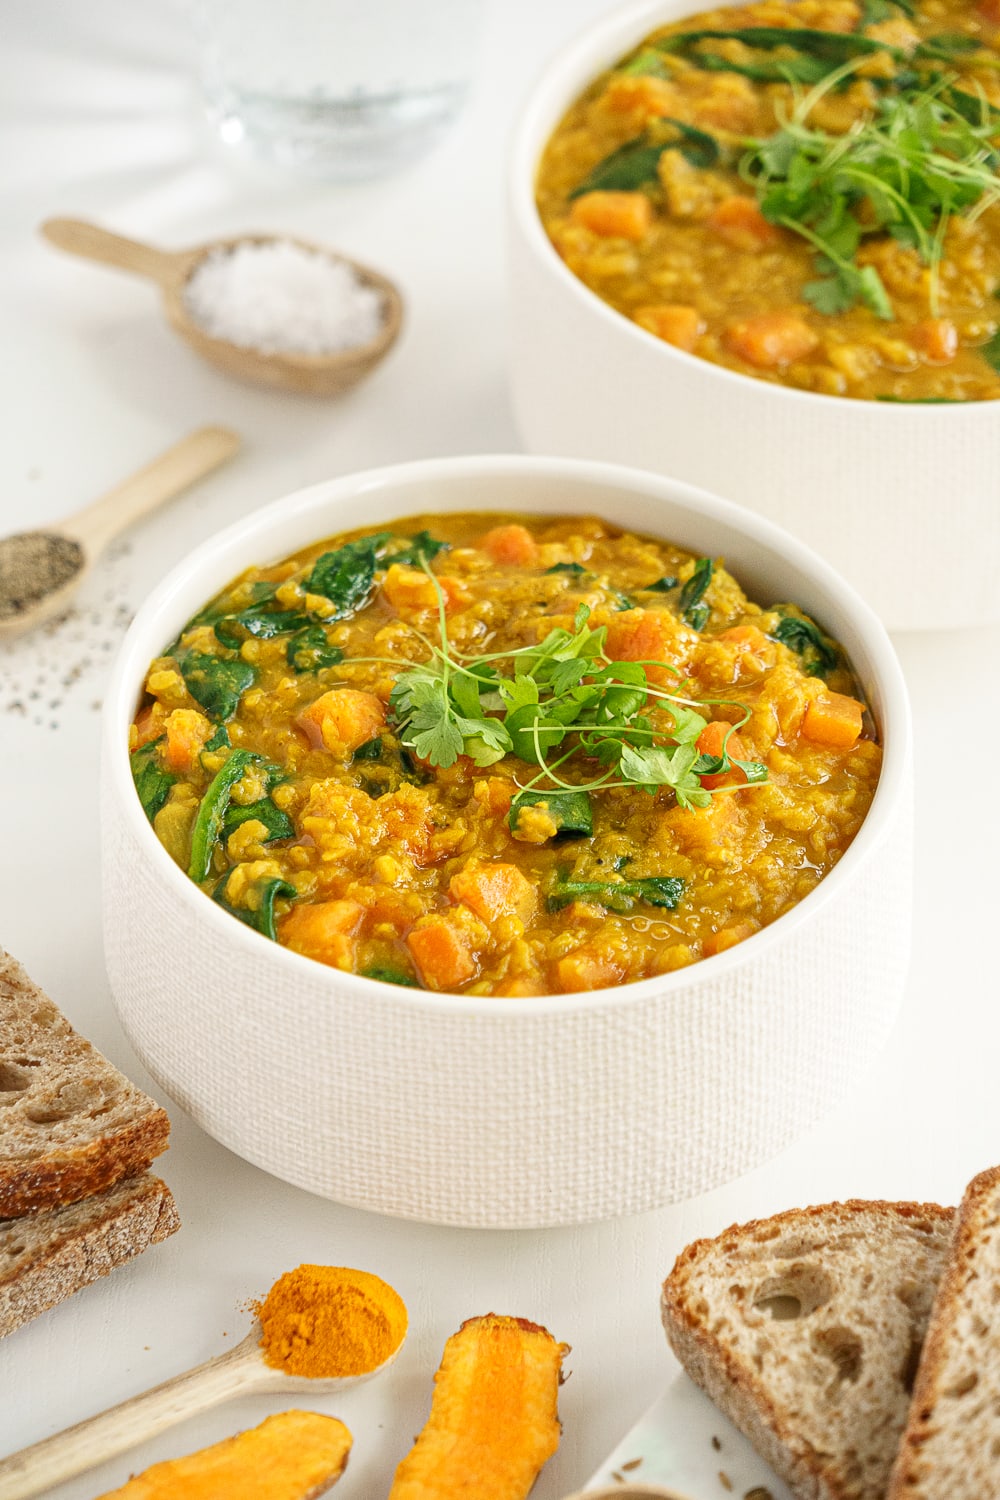 Red Lentil Soup With Spinach And Carrots - Gathering Dreams